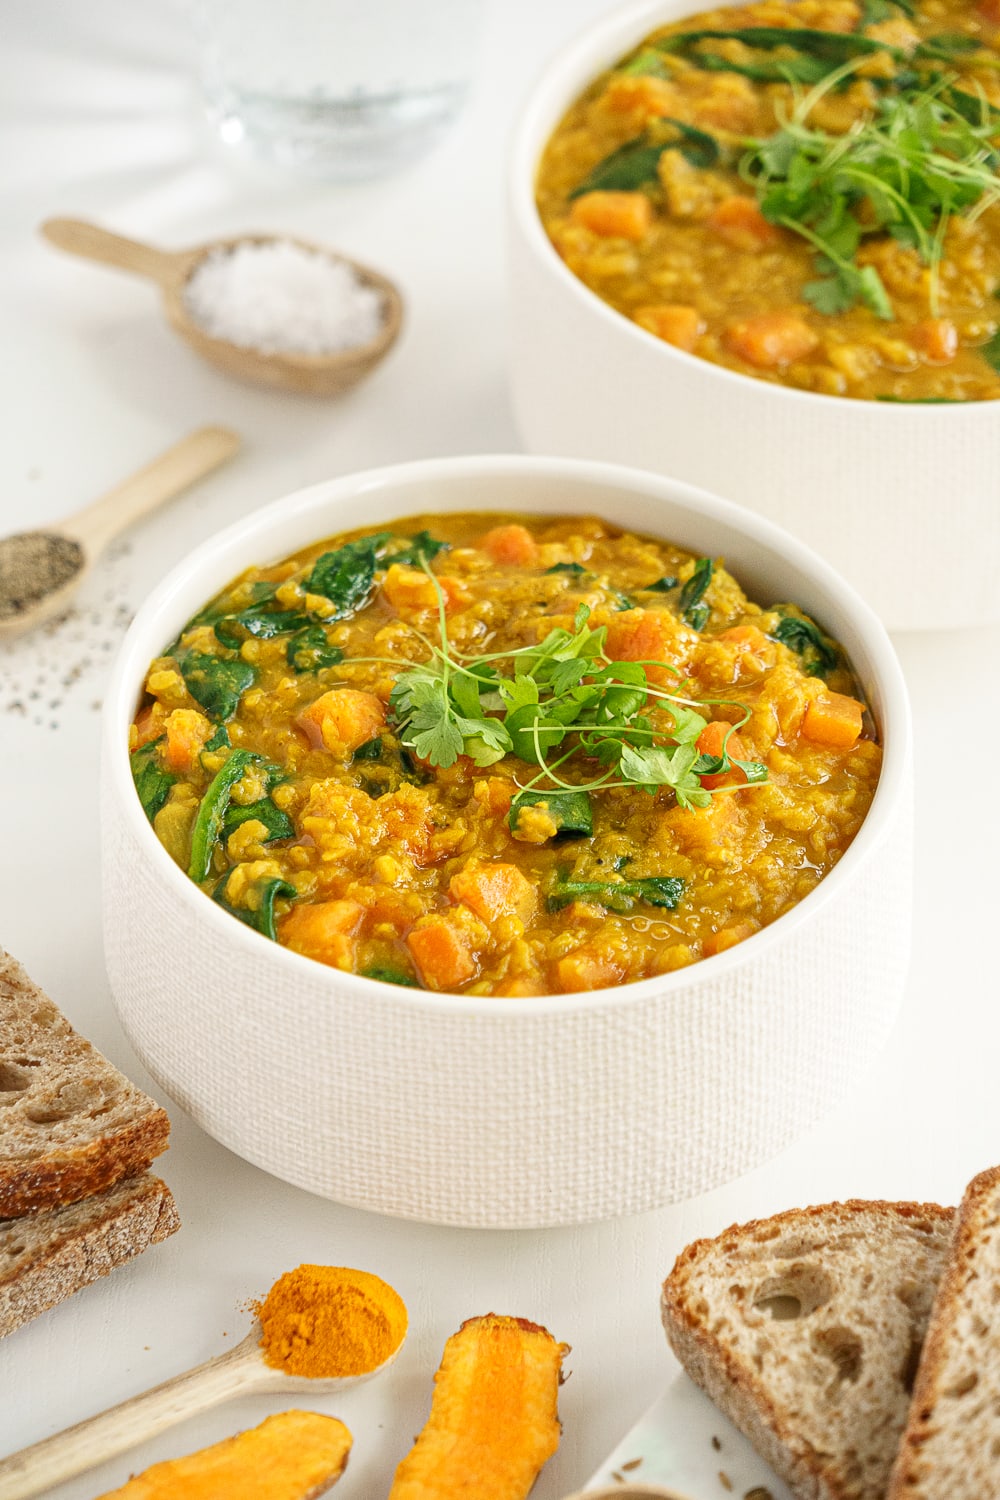 Red Lentil Soup With Spinach And Carrots - Gathering Dreams